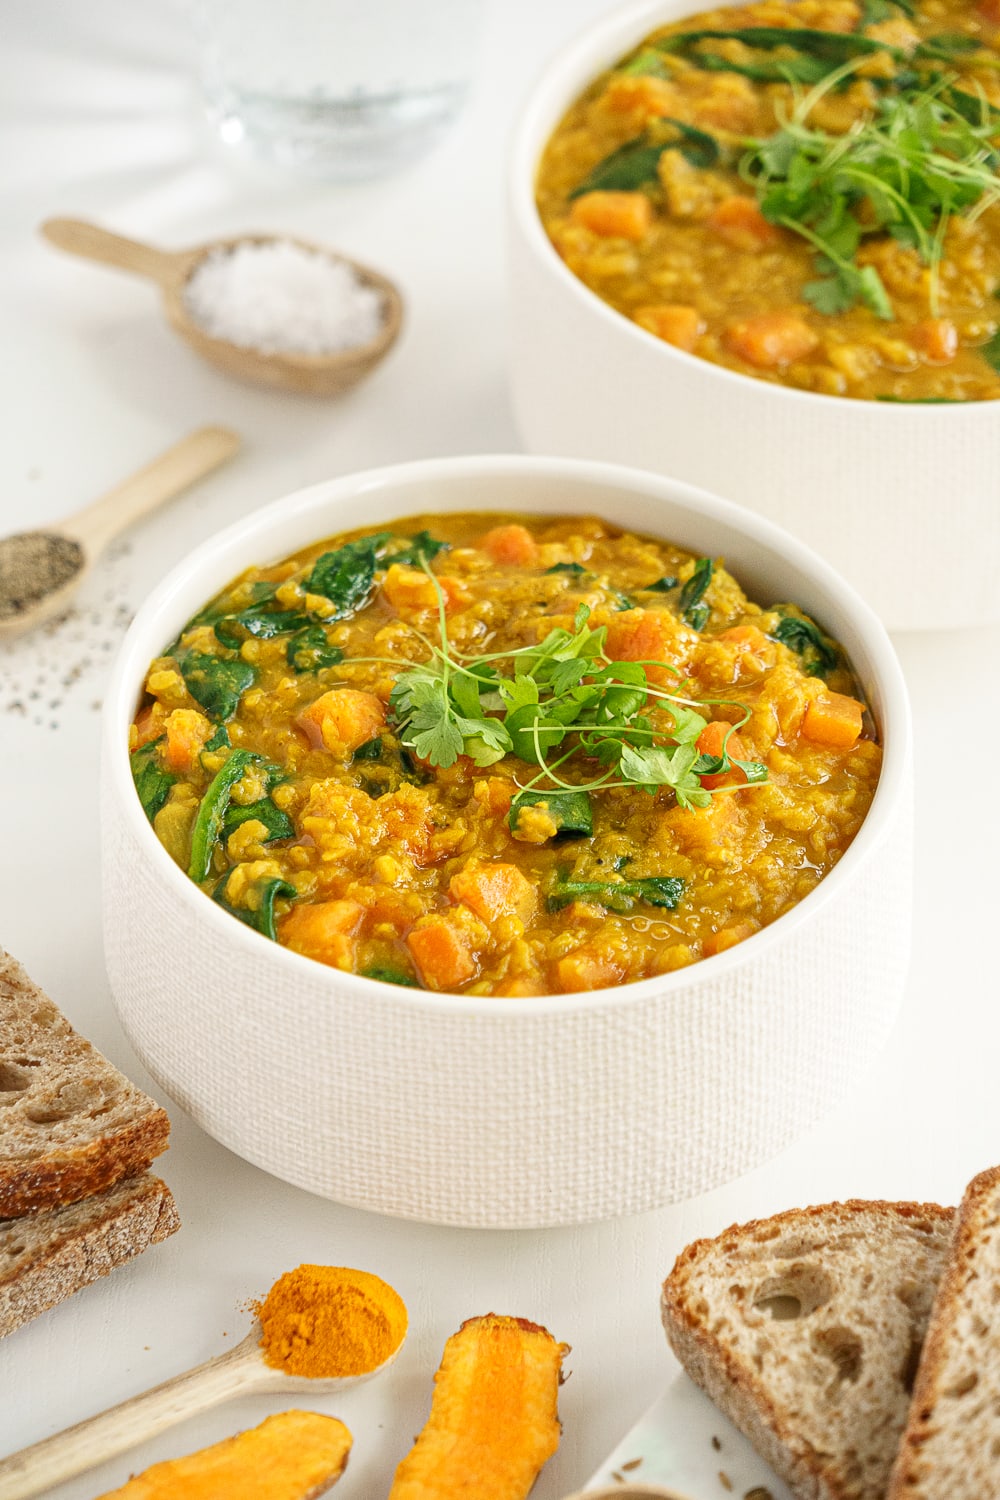 Red Lentil Soup With Spinach And Carrots - Gathering Dreams